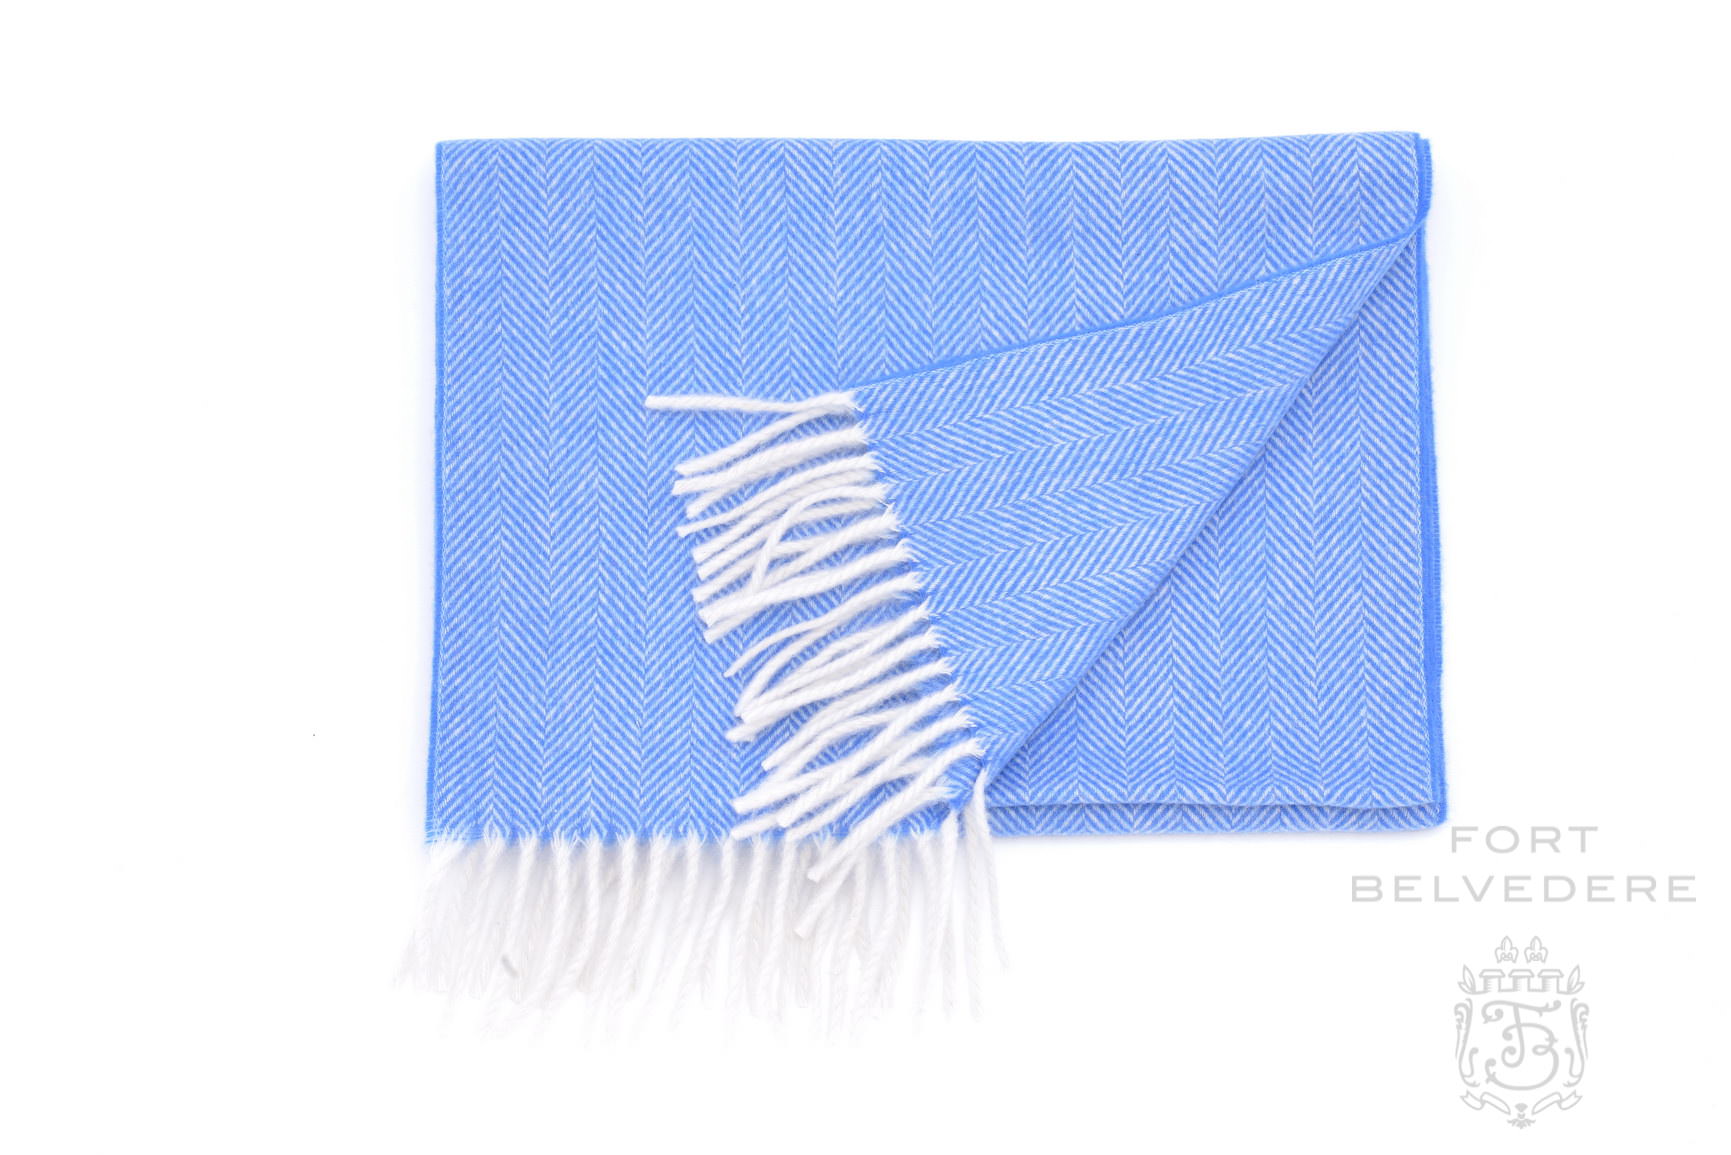 Cashmere Scarf for Men in Blue Herringbone Pattern 72 x 12 inches - Fort Belvedere